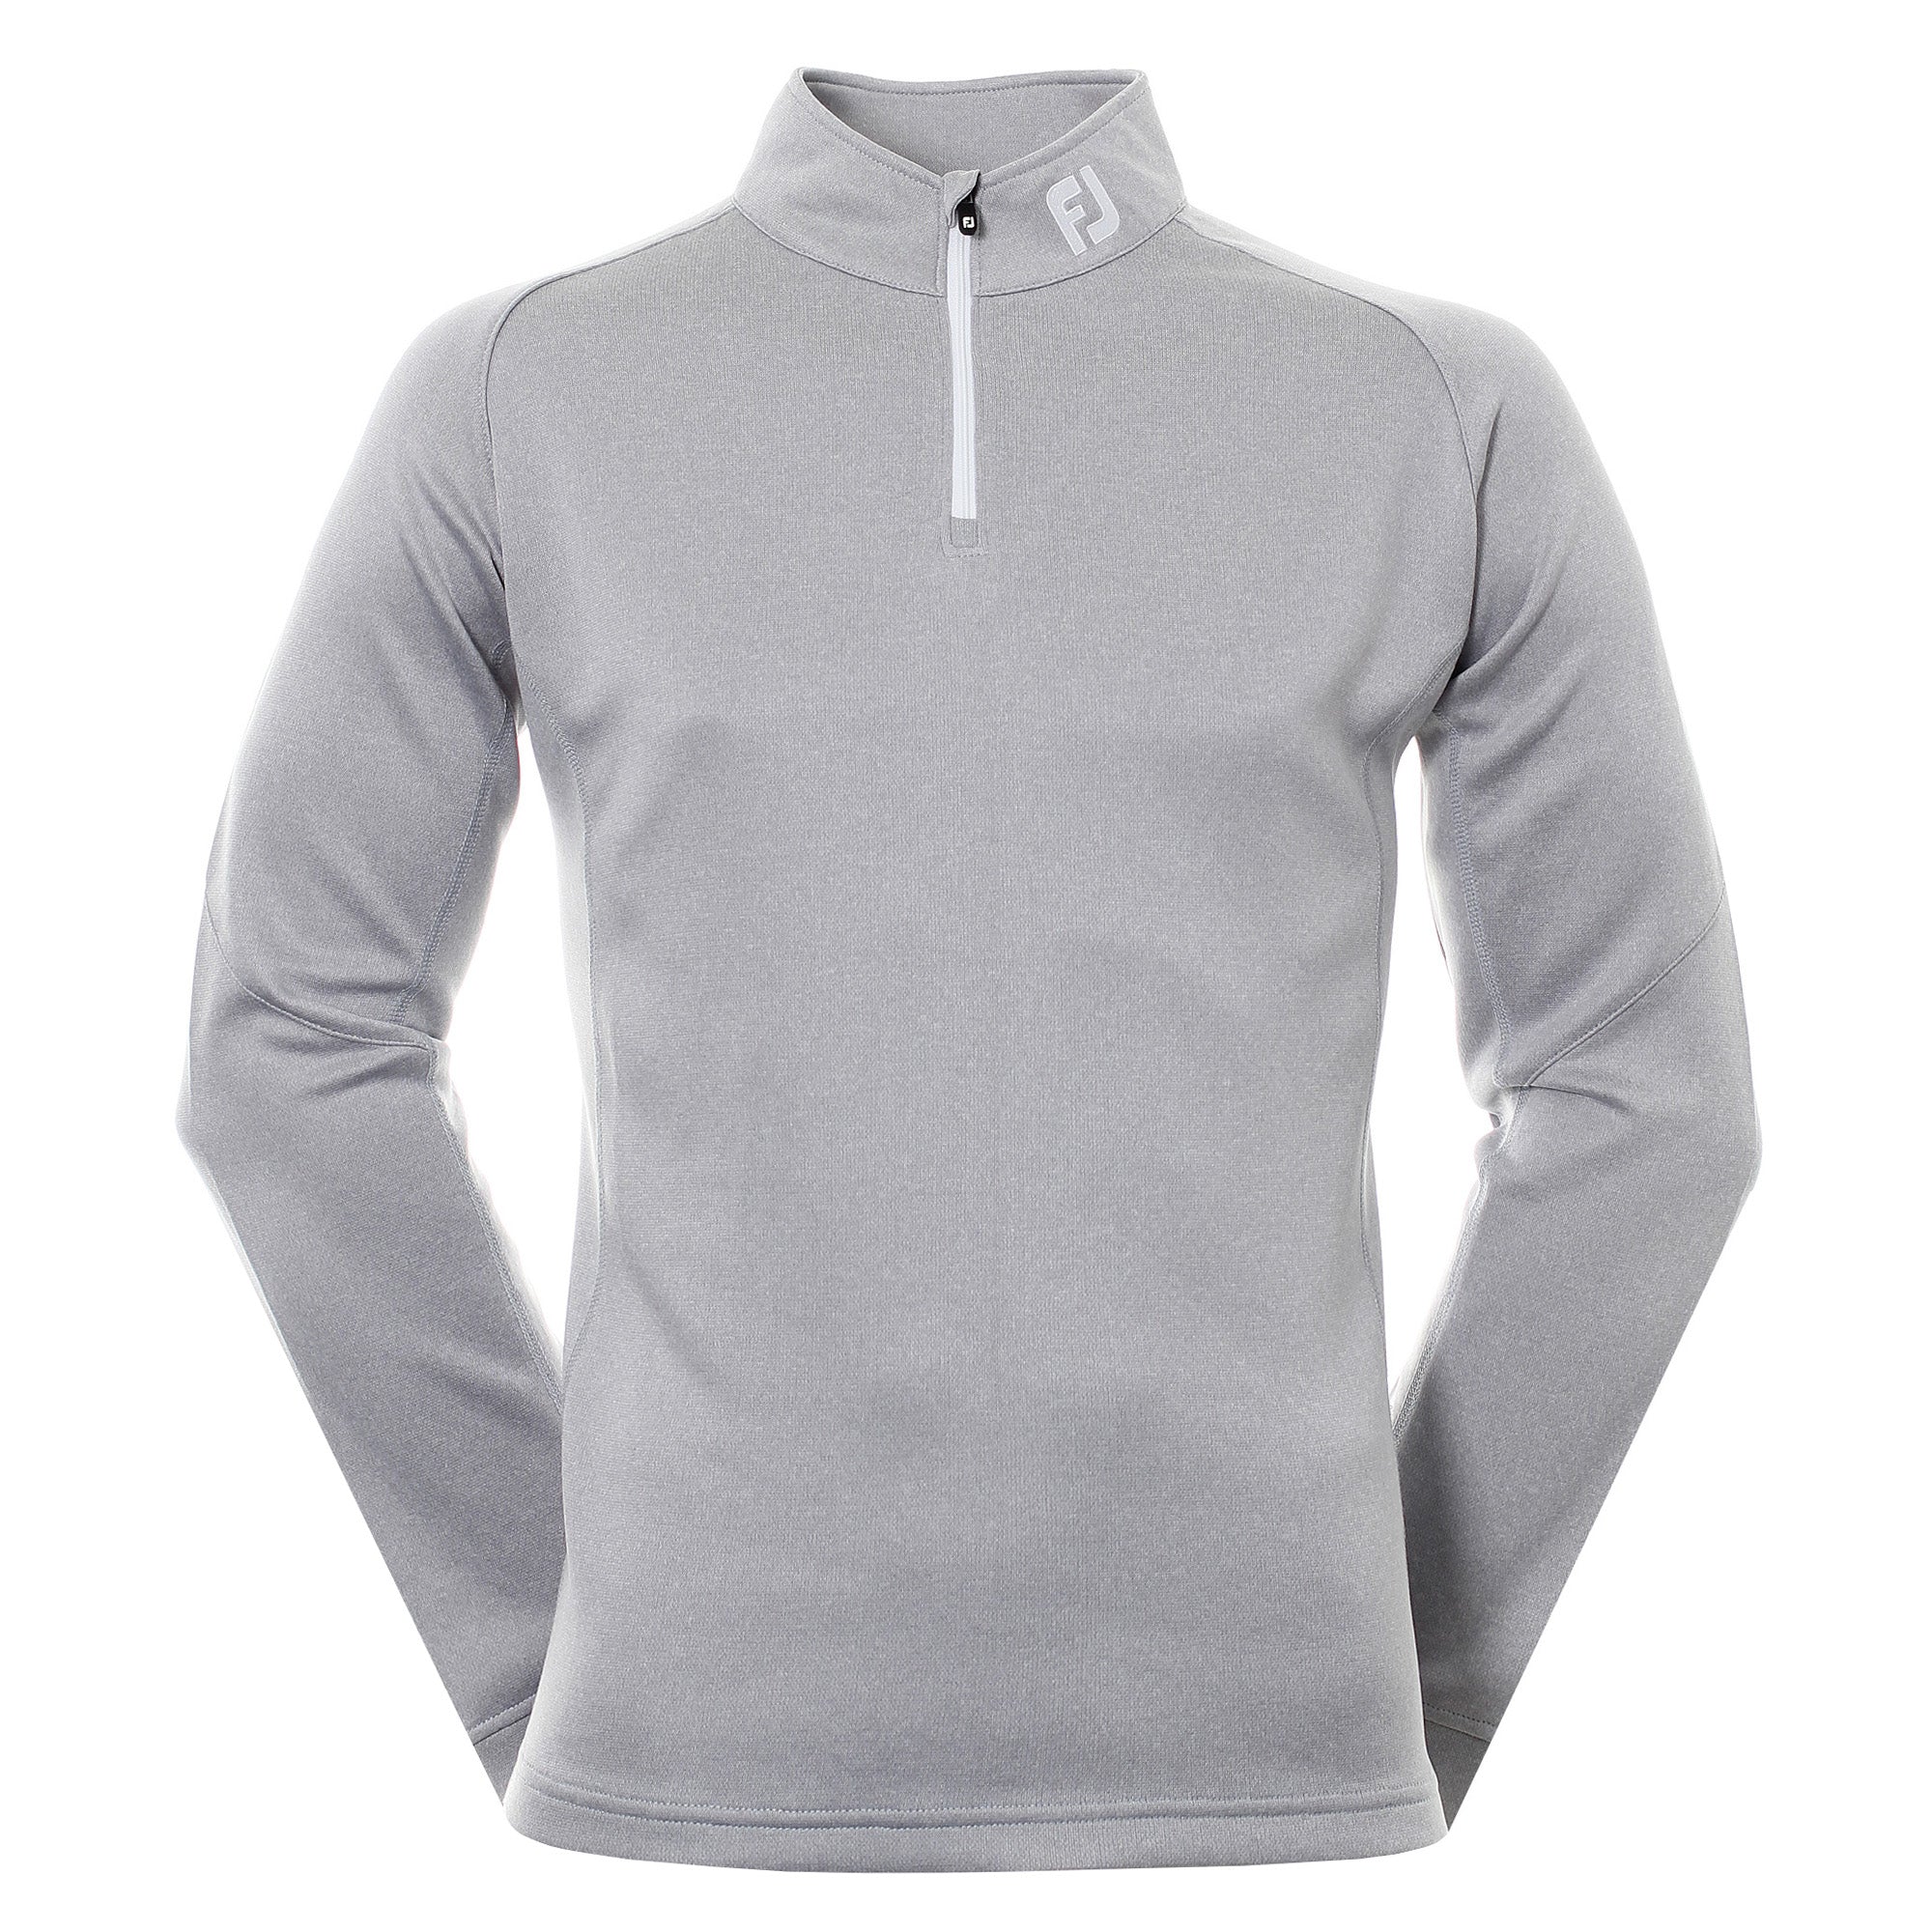 footjoy-solid-knit-chill-out-pullover-90149-grey